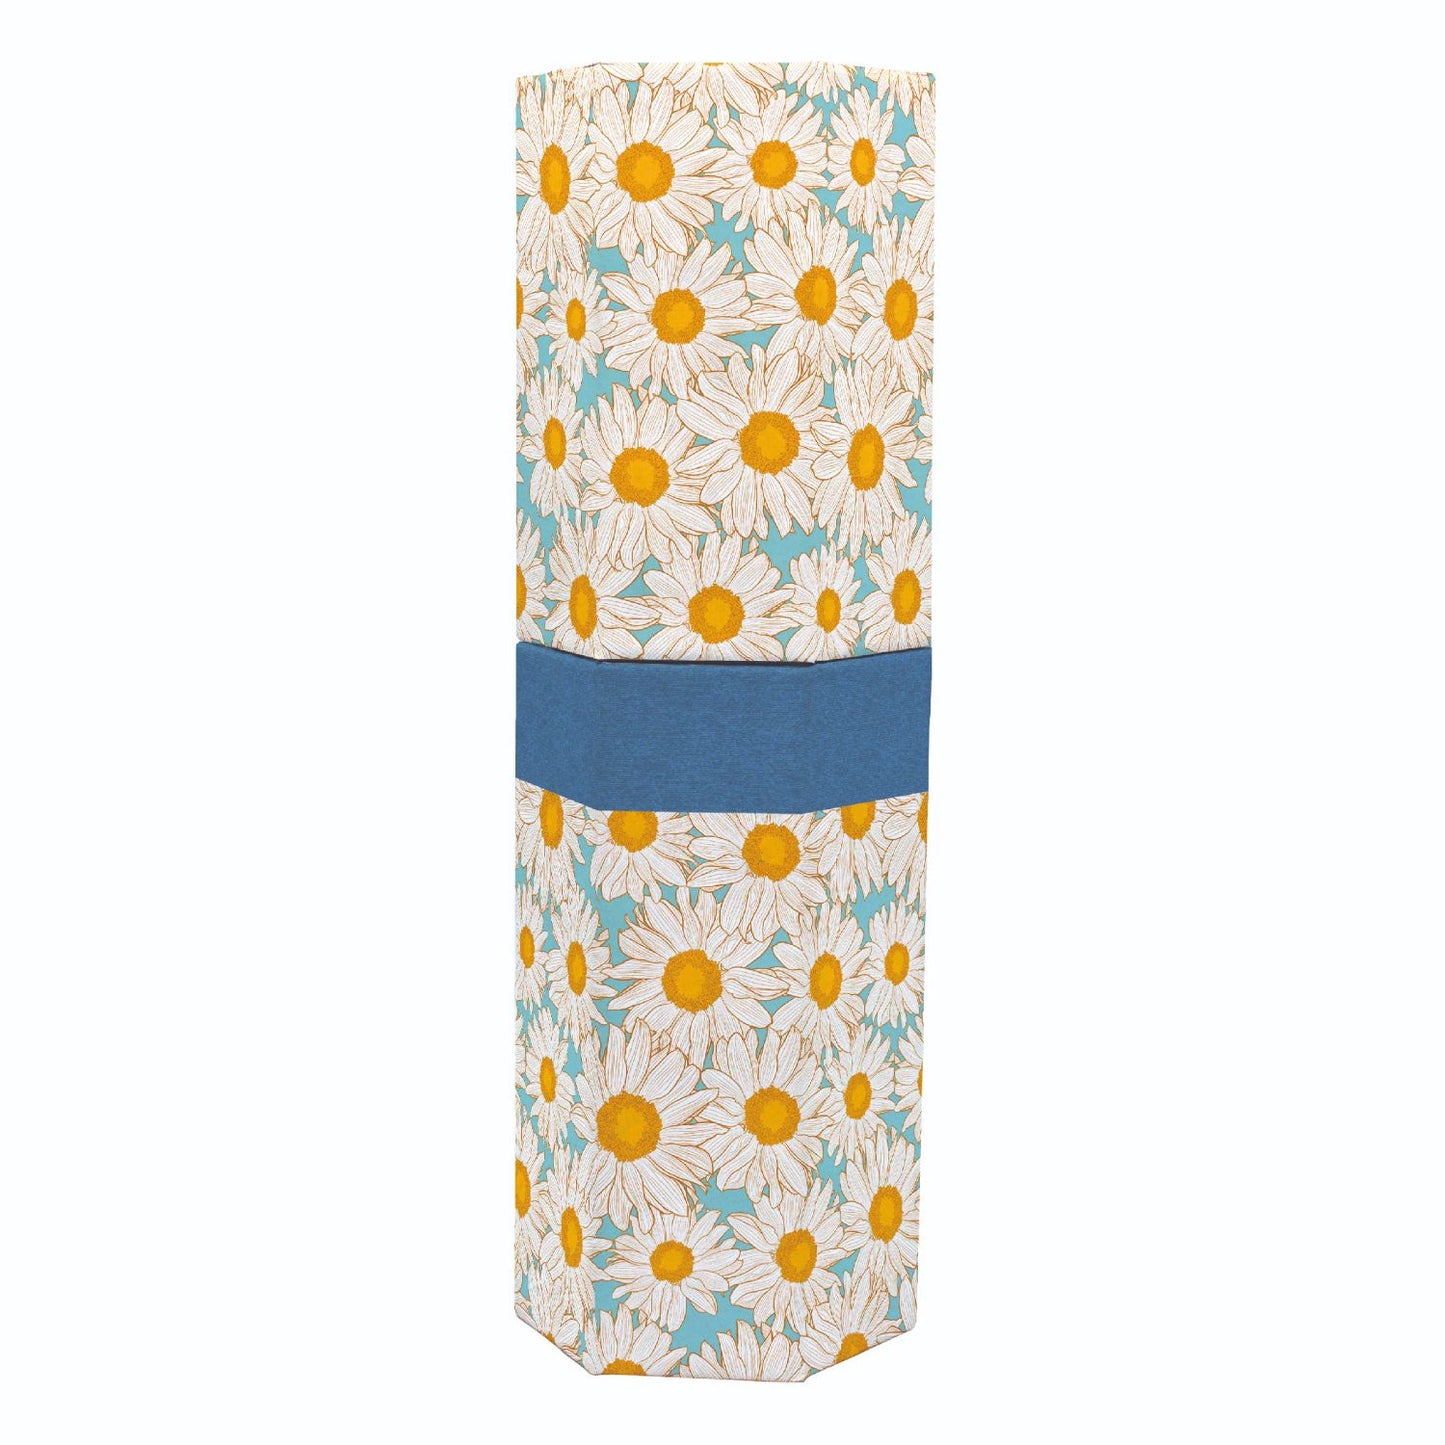 Gifted Stationery Hazy Daisies Pencil Set In Case